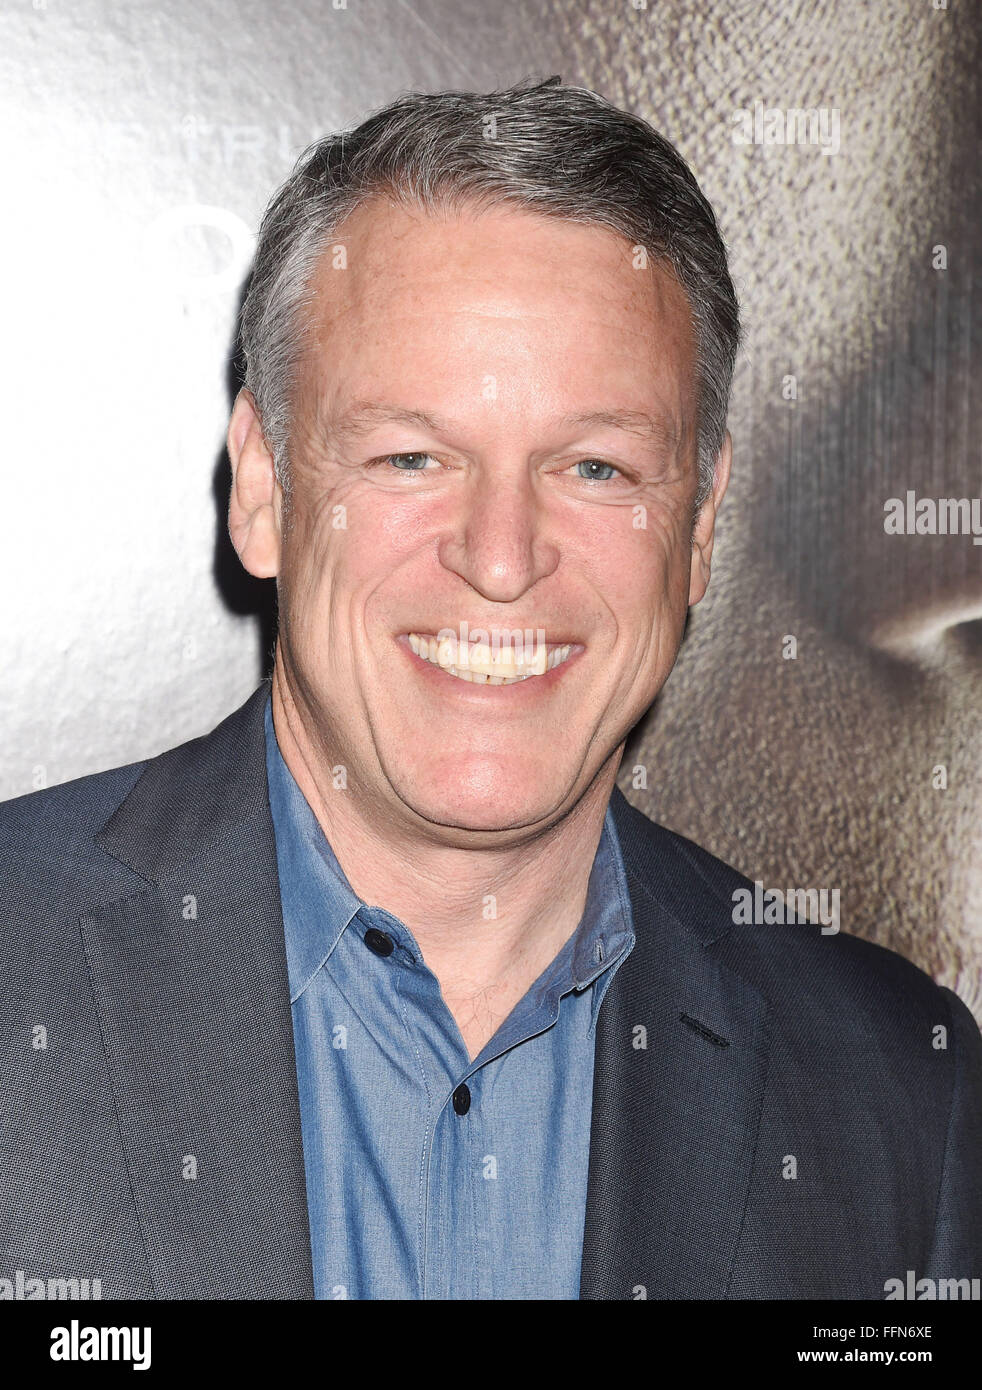 Producer Larry Shuman attends the screening of Columbia Pictures' 'Concussion' at the Regency Village Theater on November 23, 2015 in Westwood, California., Stock Photo